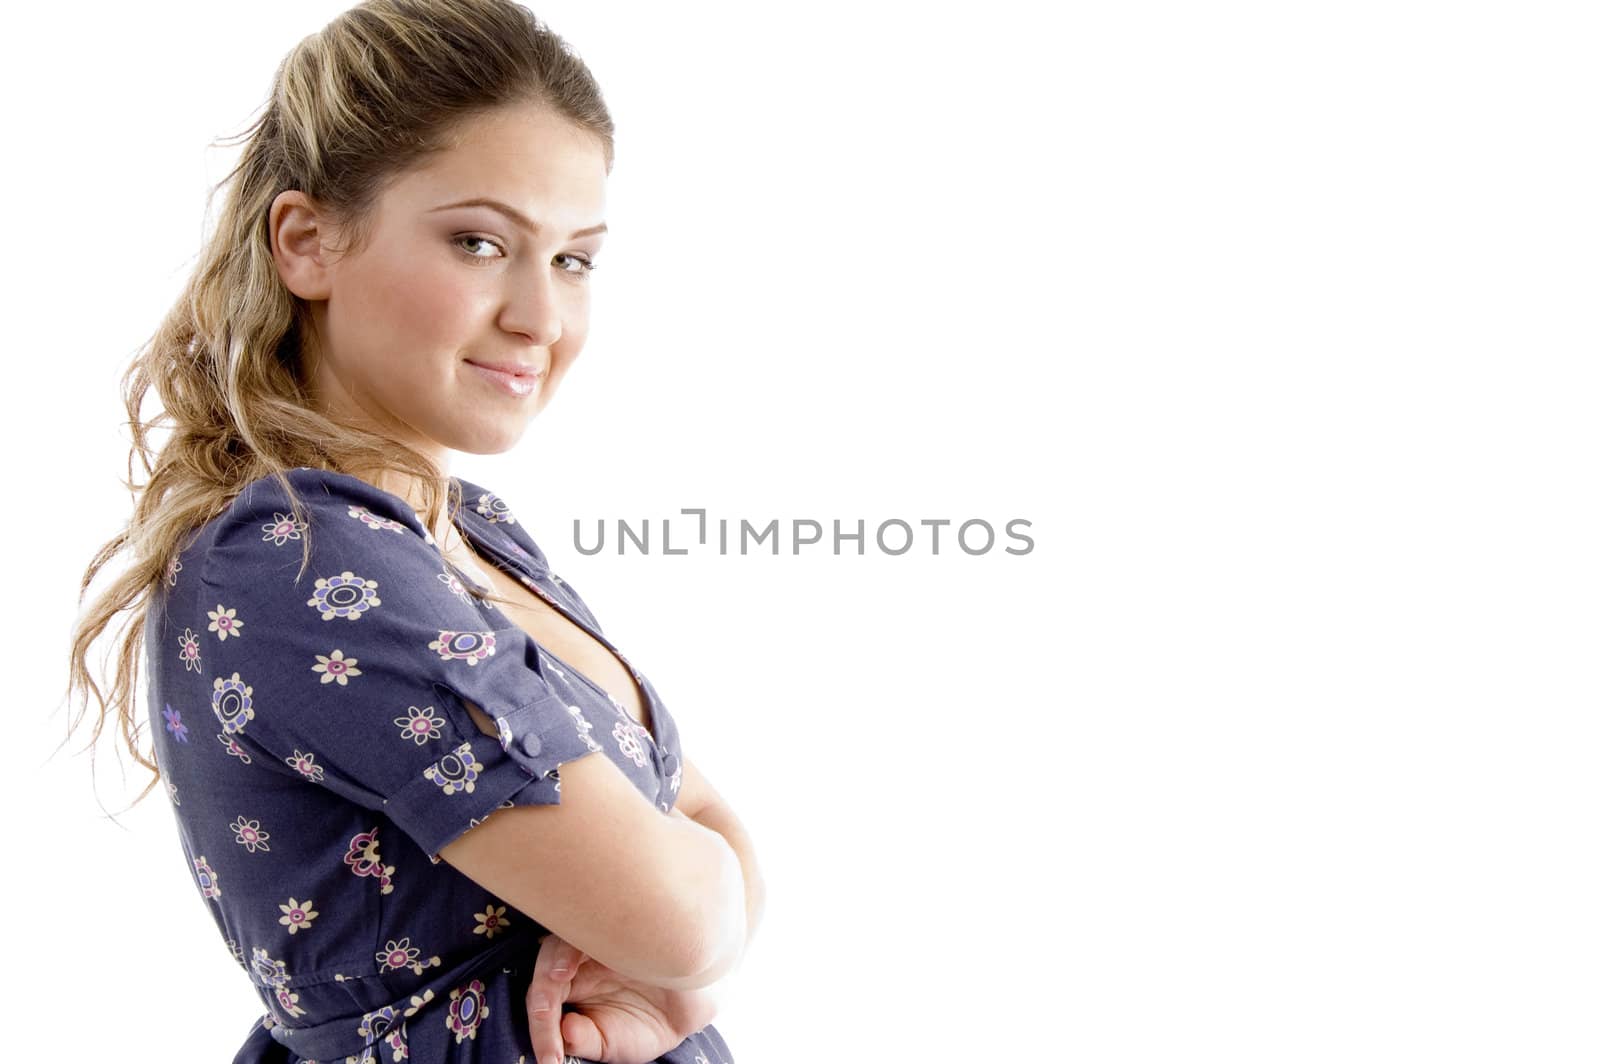 side view of smiling young girl with crossed arms by imagerymajestic